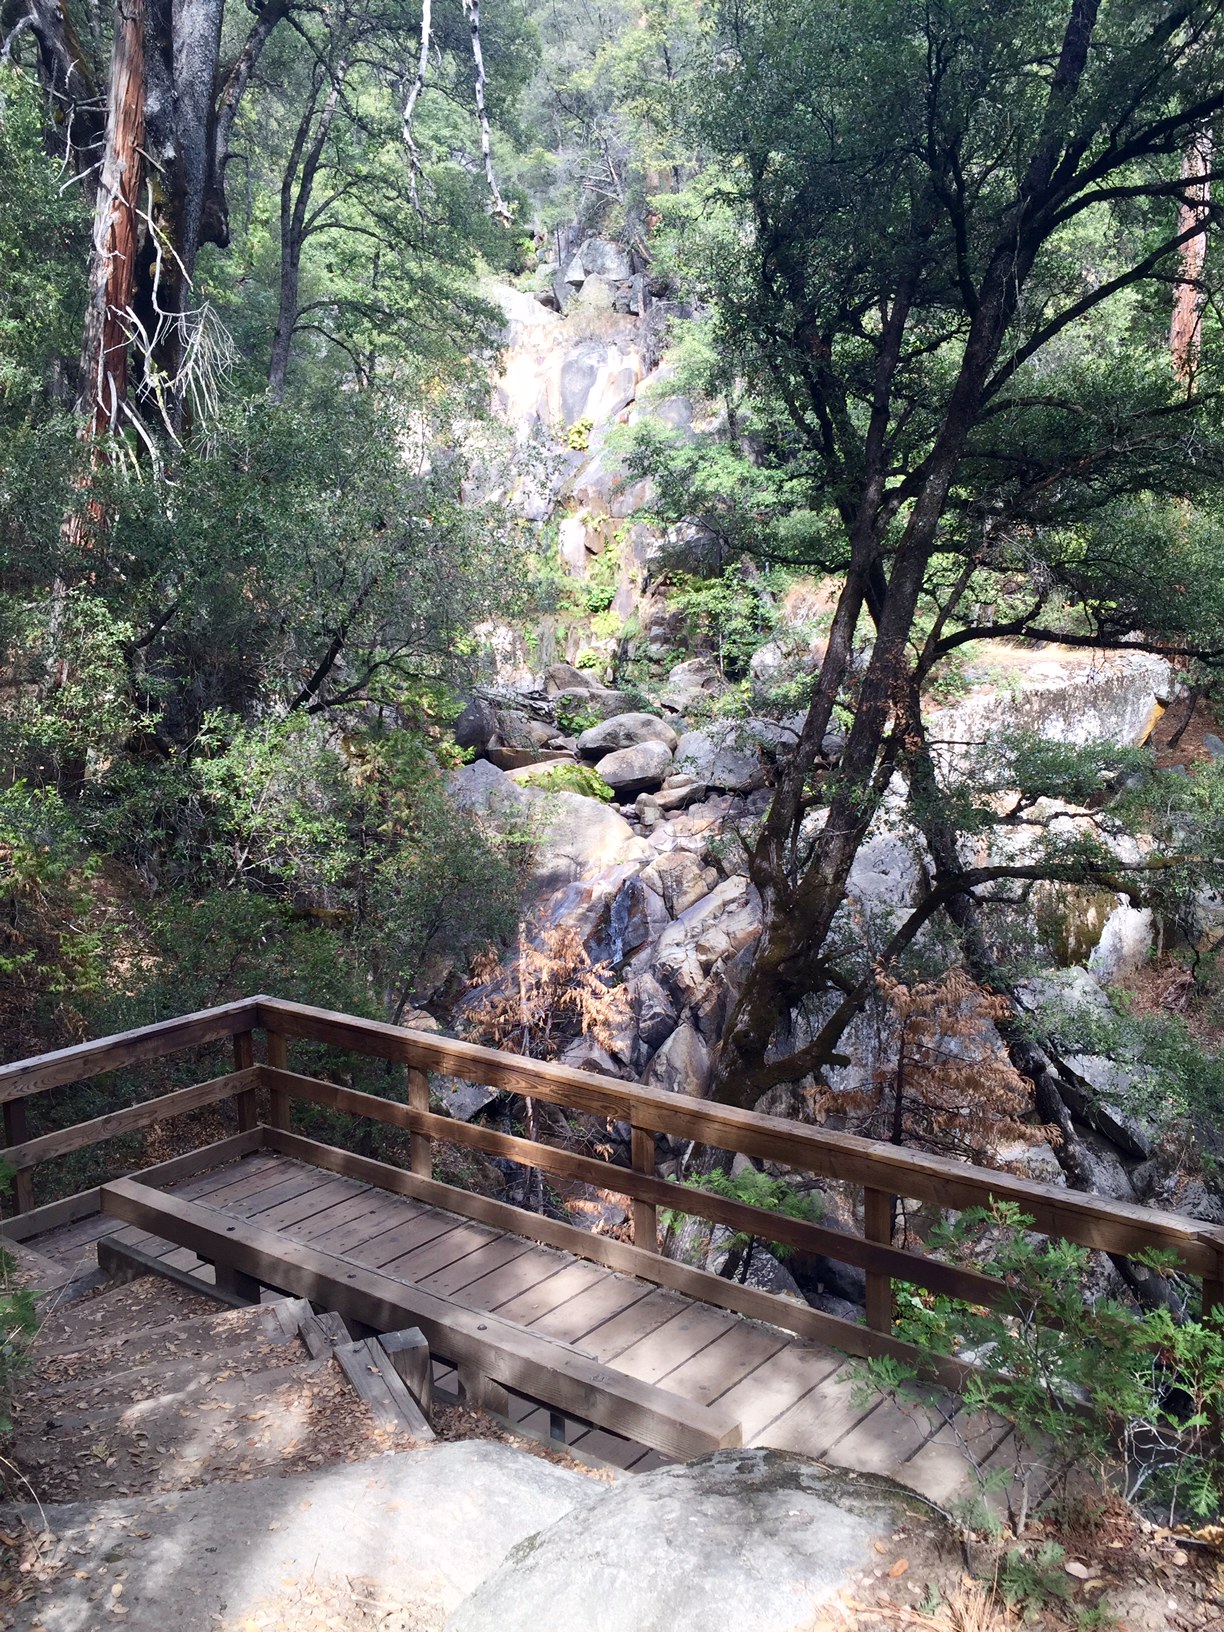 This wooden balcony lookout offers a beautiful view of Corlieu Falls